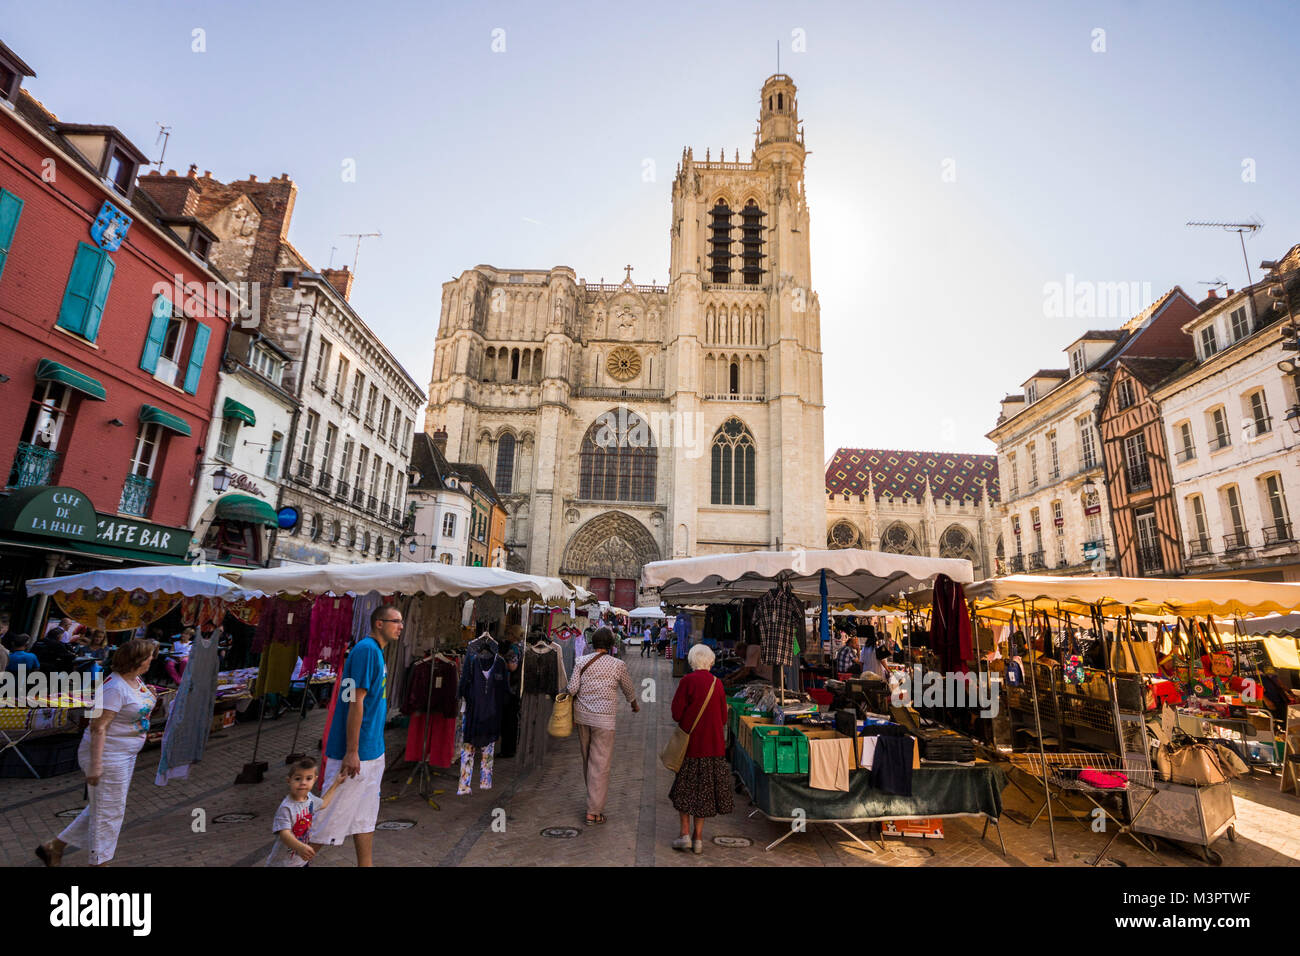 The Cathedral of Saint Stephen of Sens, a Catholic cathedral in Sens in Burgundy, eastern France, with the market square full of people Stock Photo